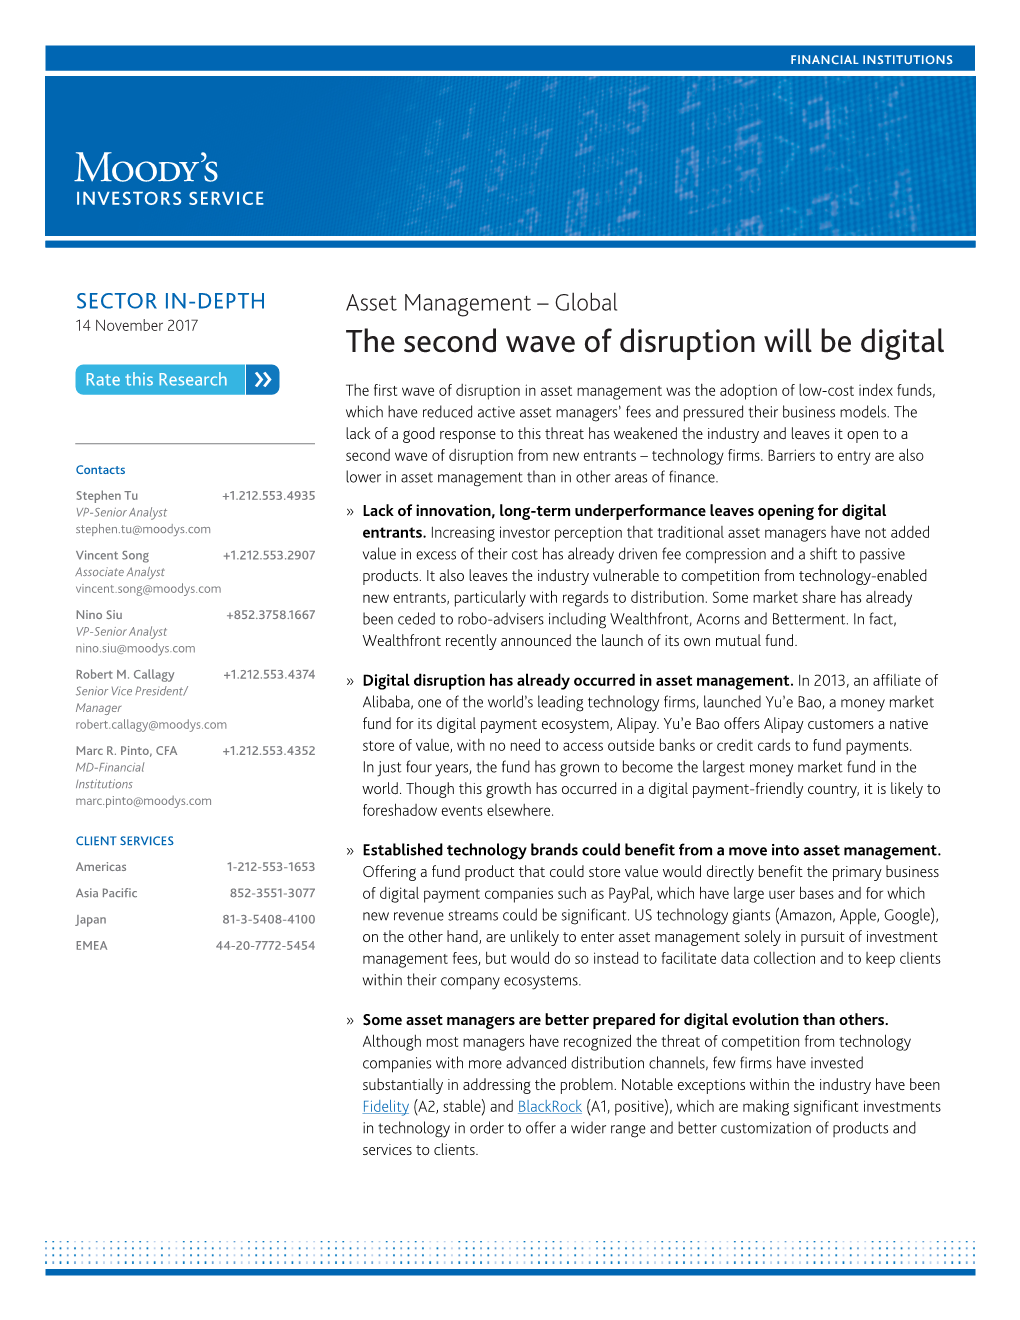 The Second Wave of Disruption Will Be Digital